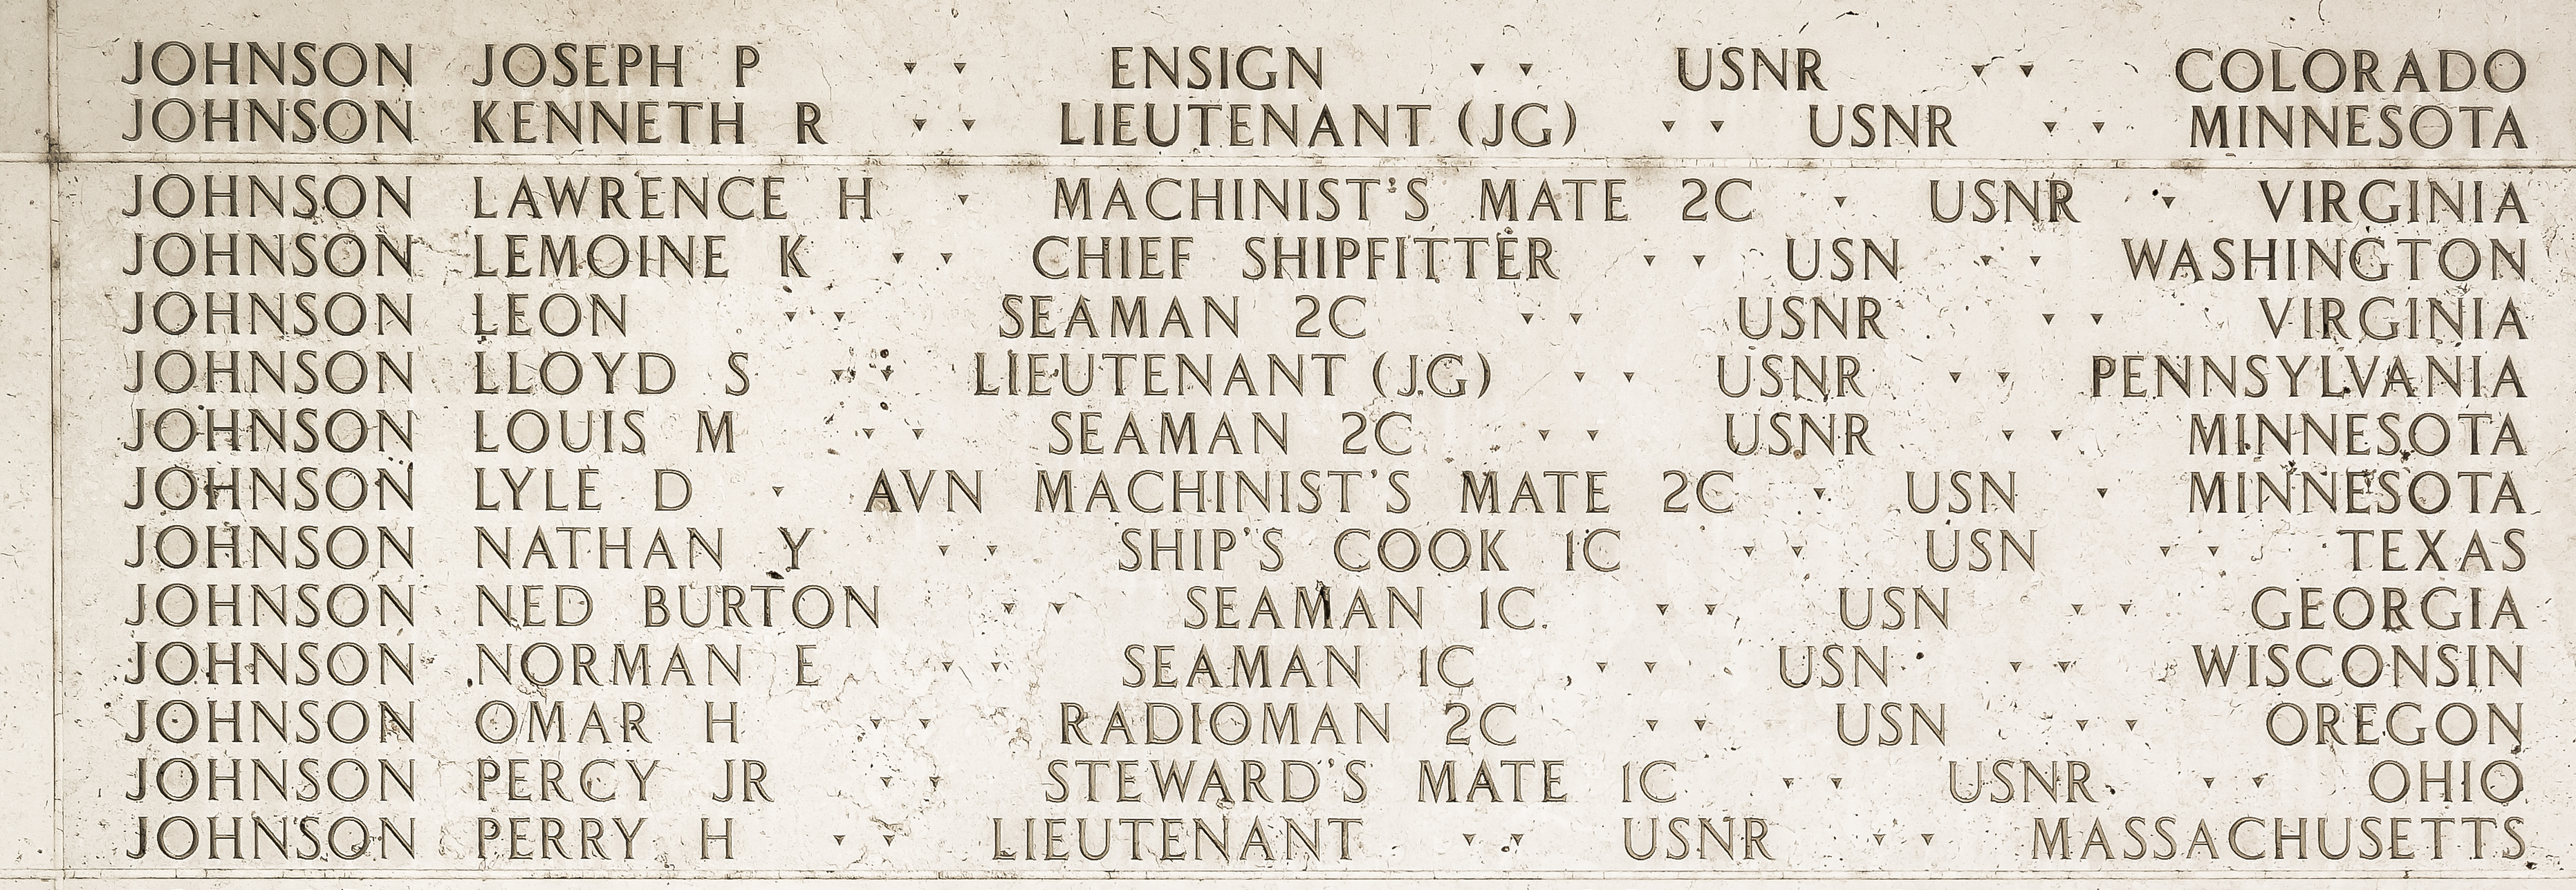 Nathan Y. Johnson, Ship's Cook First Class